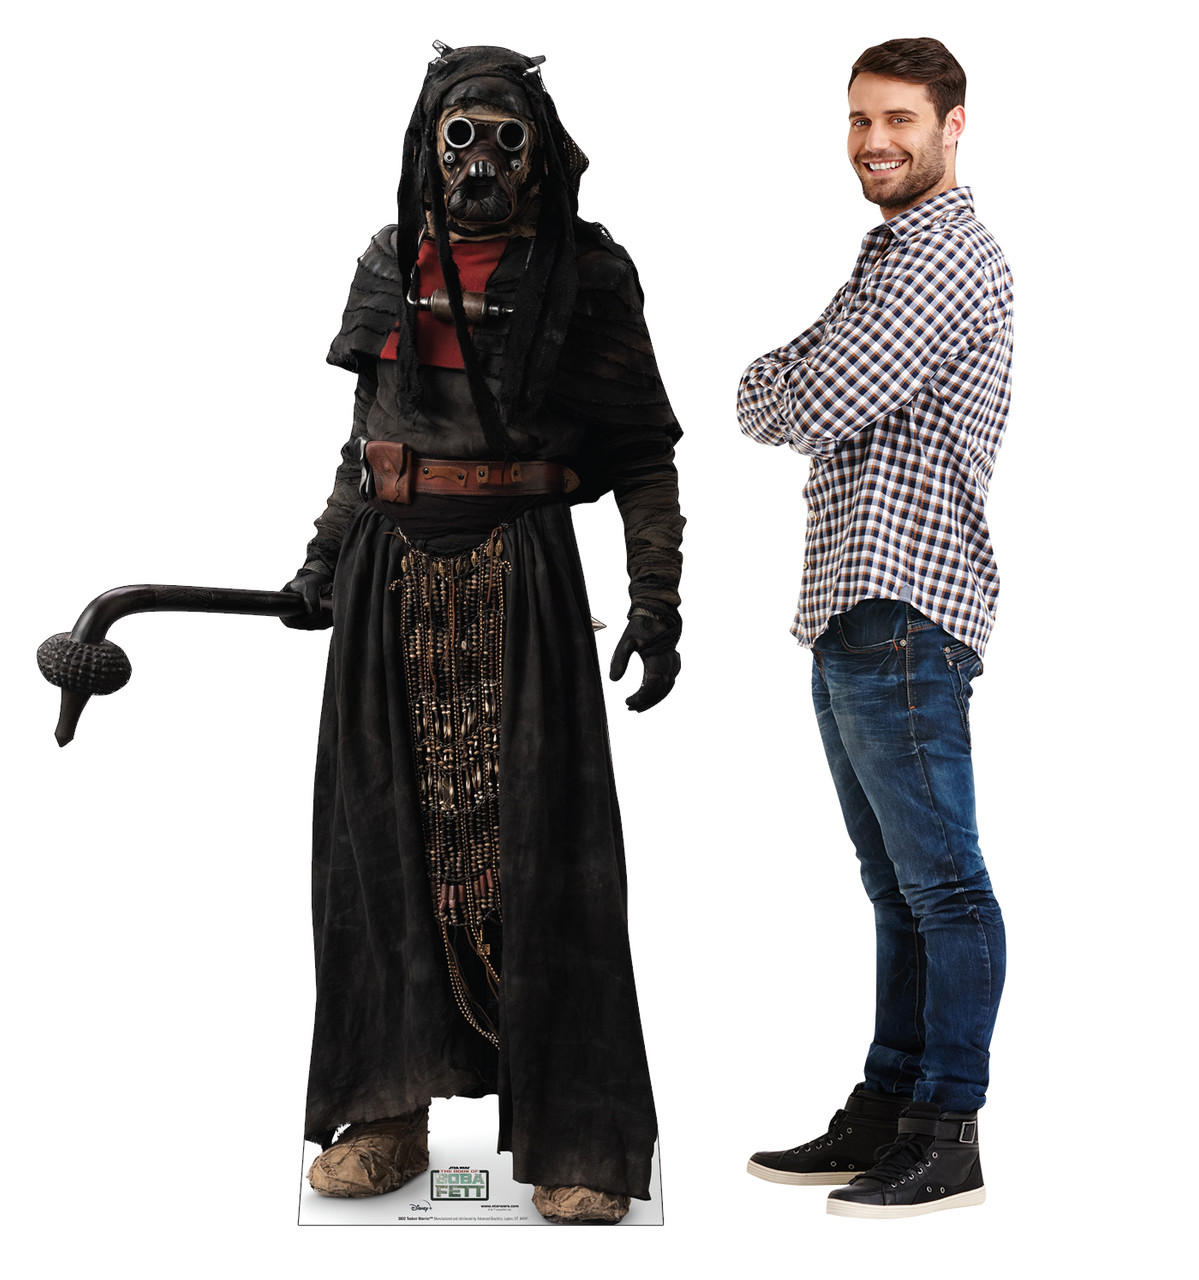 Life-size cardboard standee of Tusken WarriorTM from Lucas/Disney+ TV series The Book of Boba Fett with model.